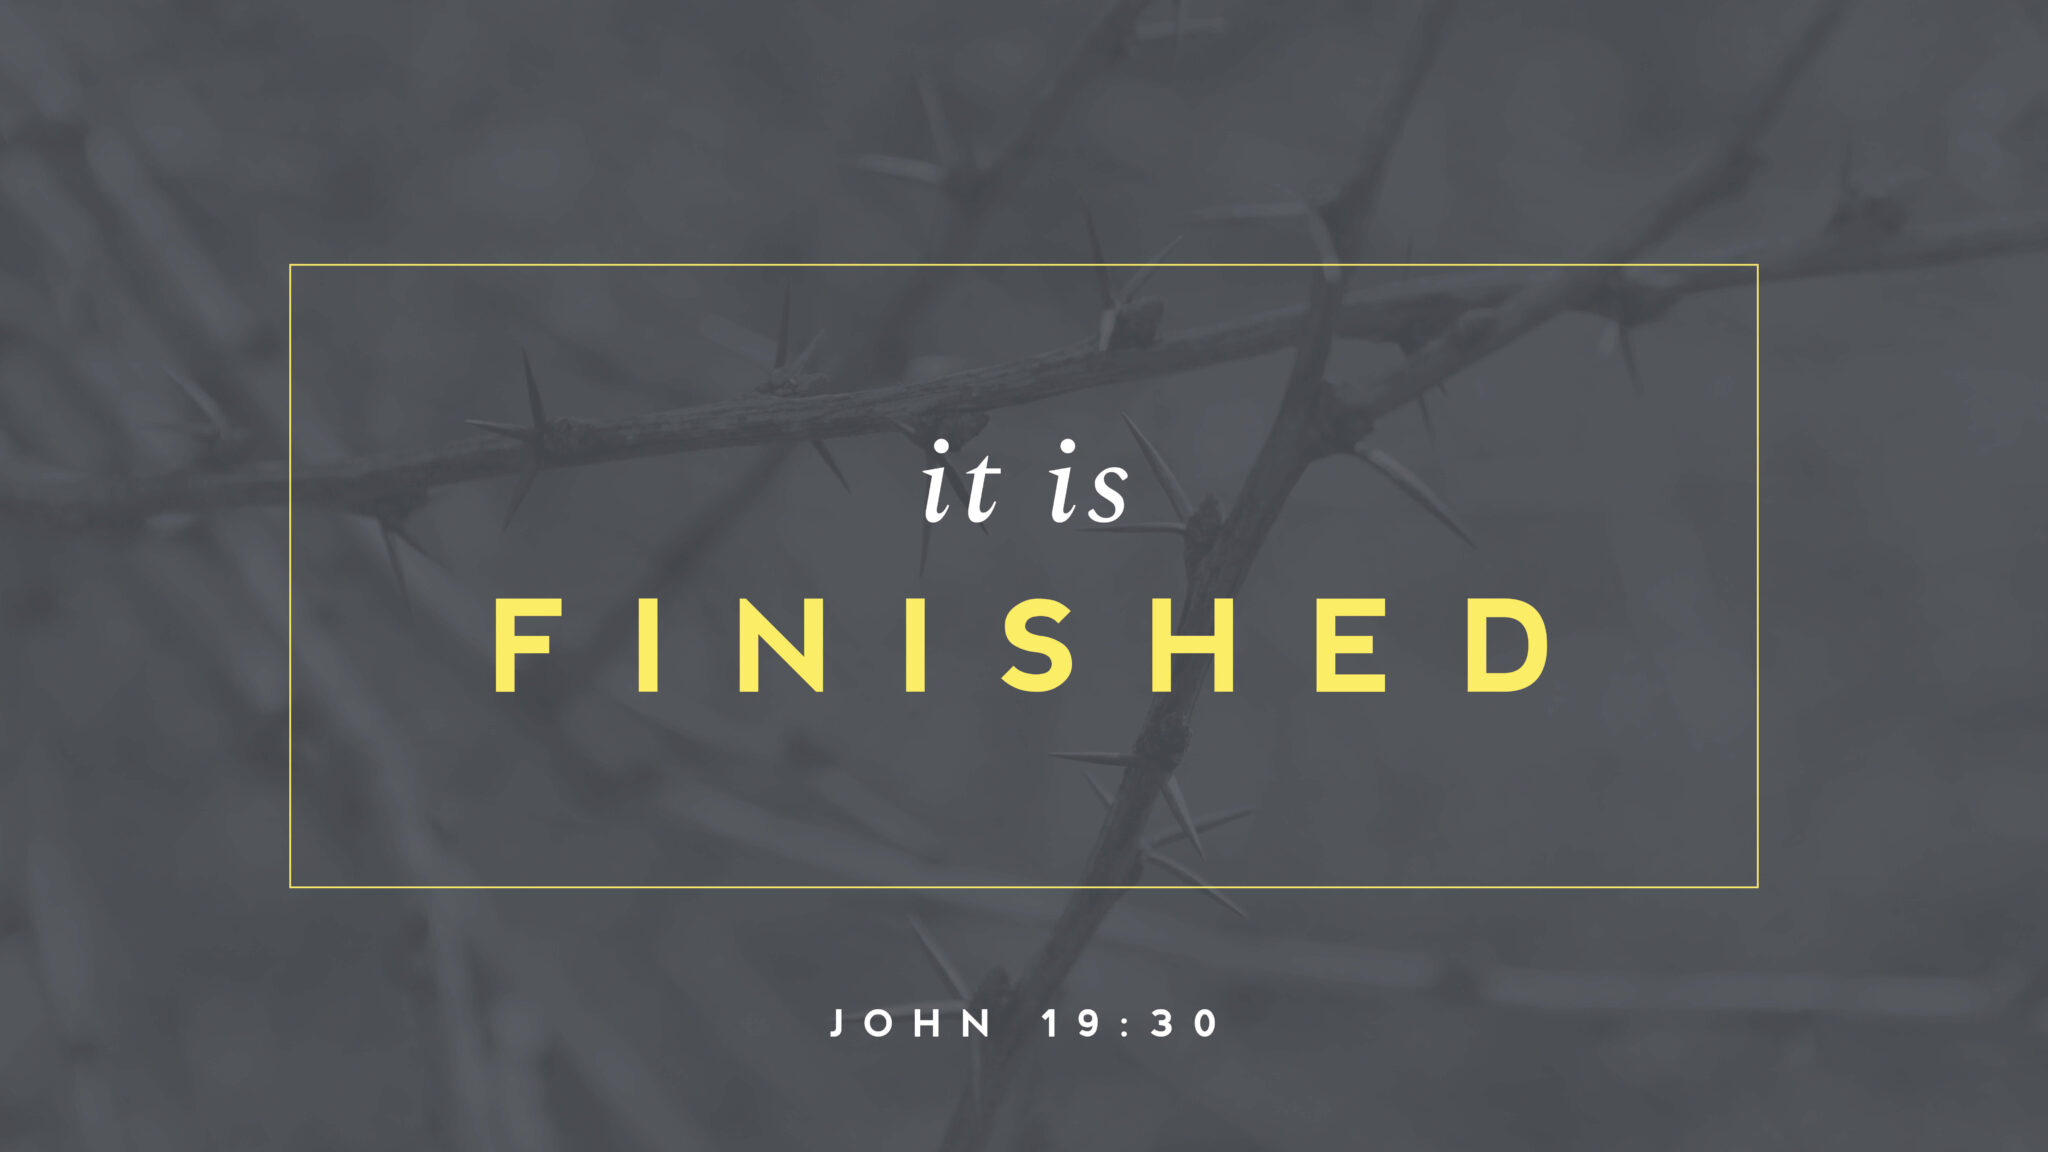 "It is finished" is in text over a picture of branches.